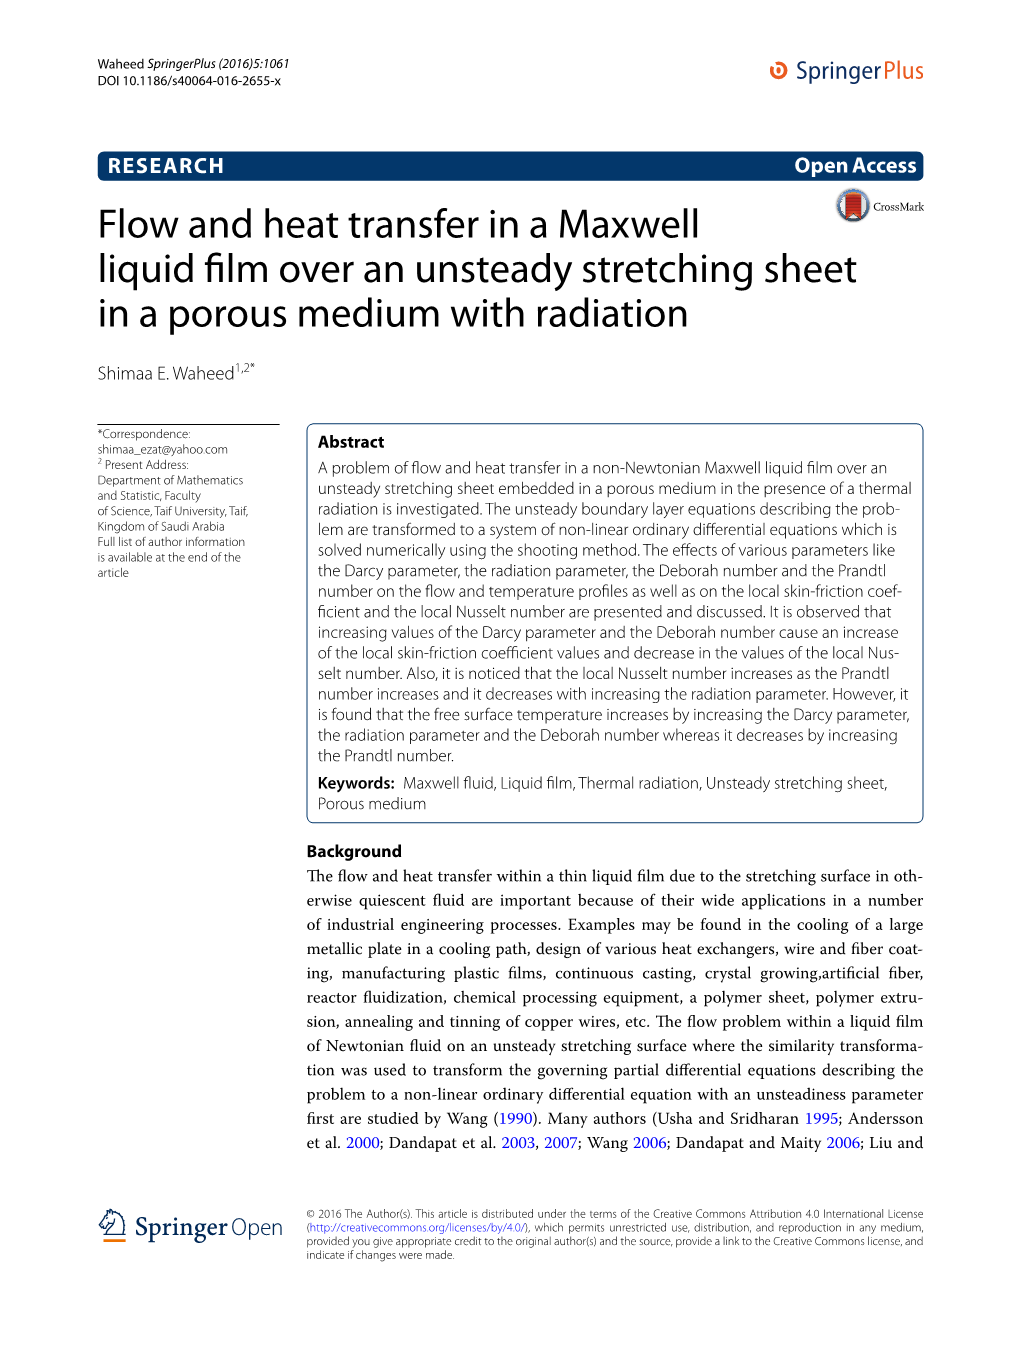 Flow and Heat Transfer in a Maxwell Liquid Film Over an Unsteady Stretching Sheet in a Porous Medium with Radiation